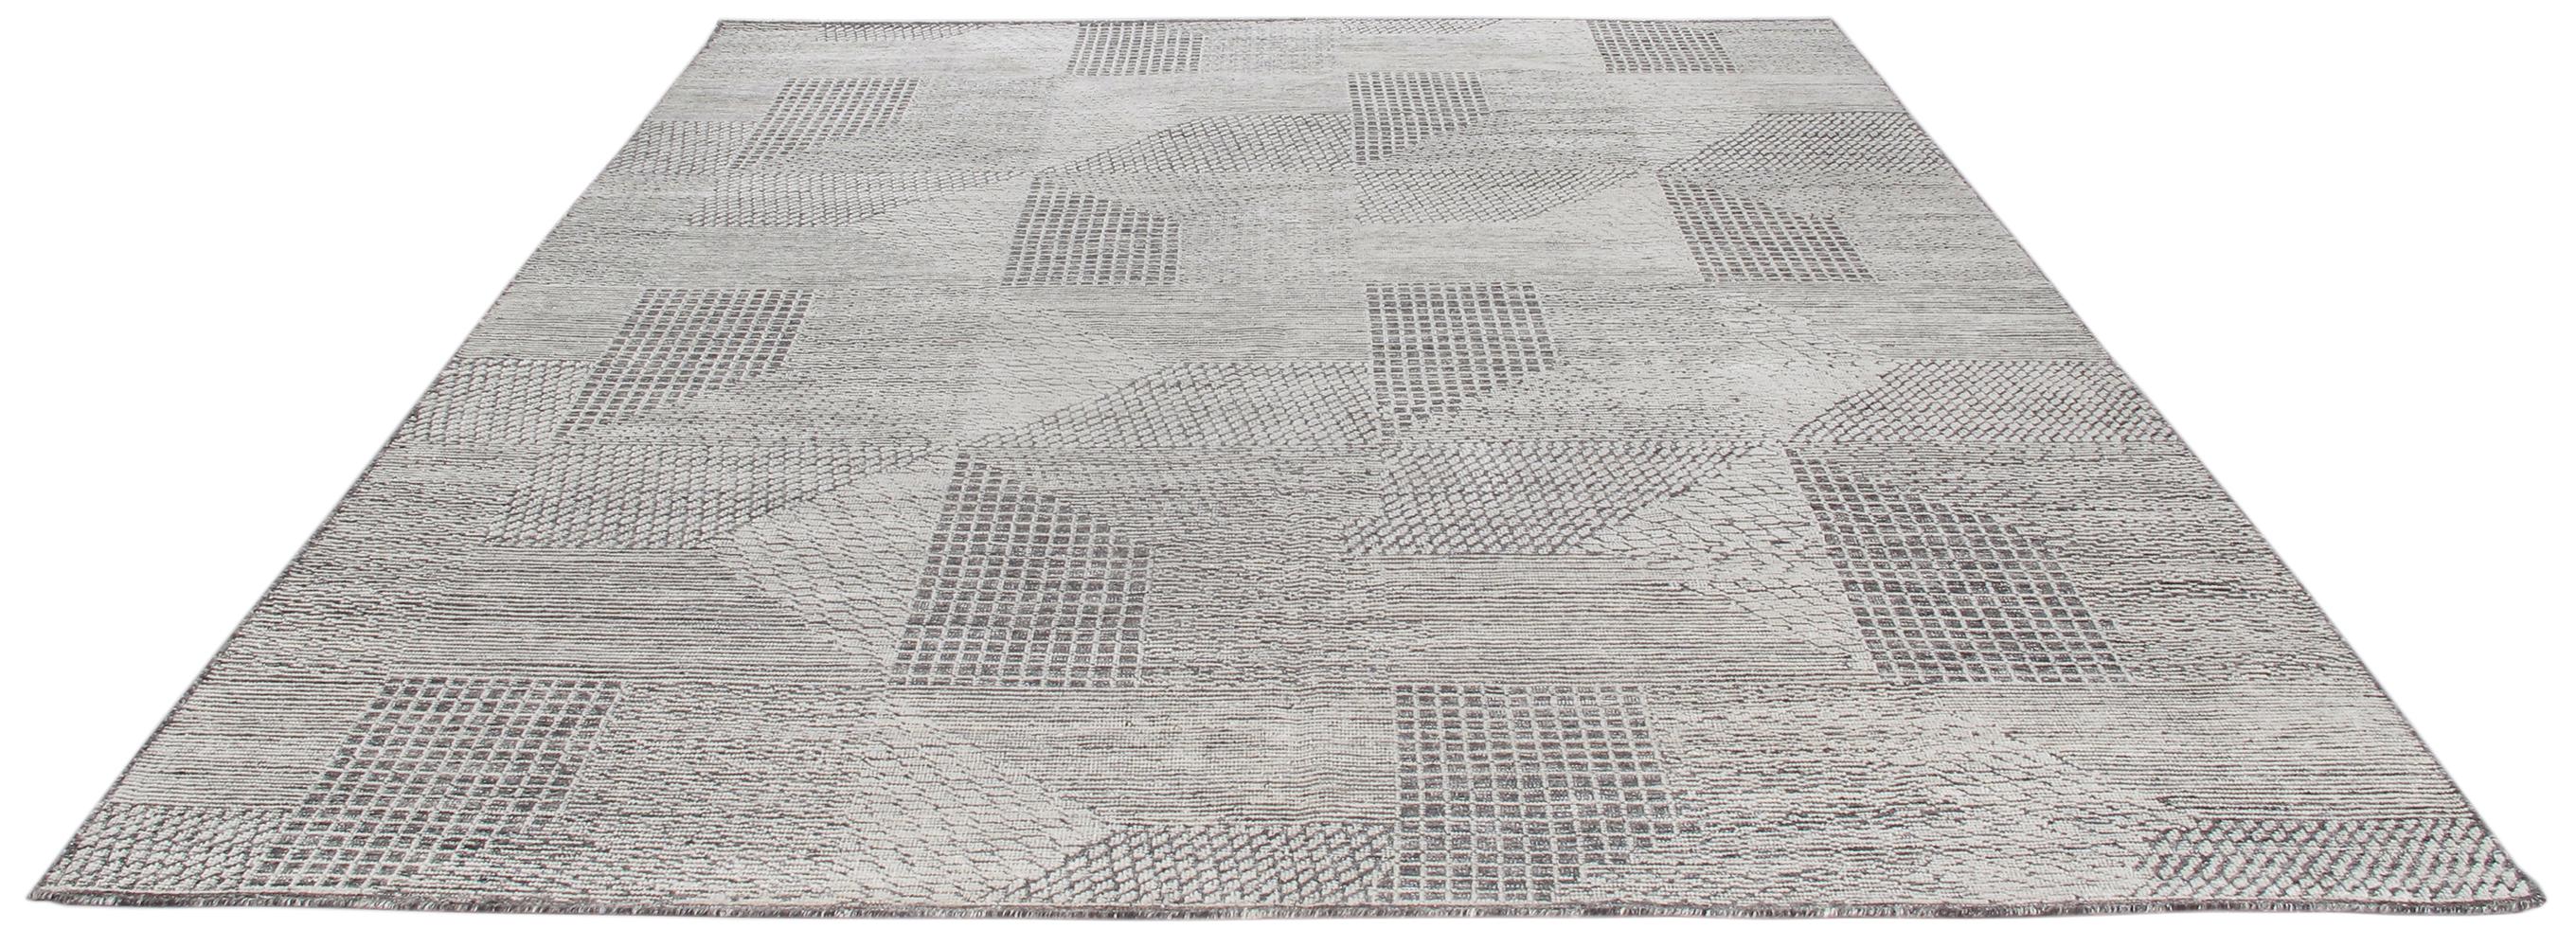 Indian Modern Contemporary Mosaic Geometric Handknotted Rug  For Sale